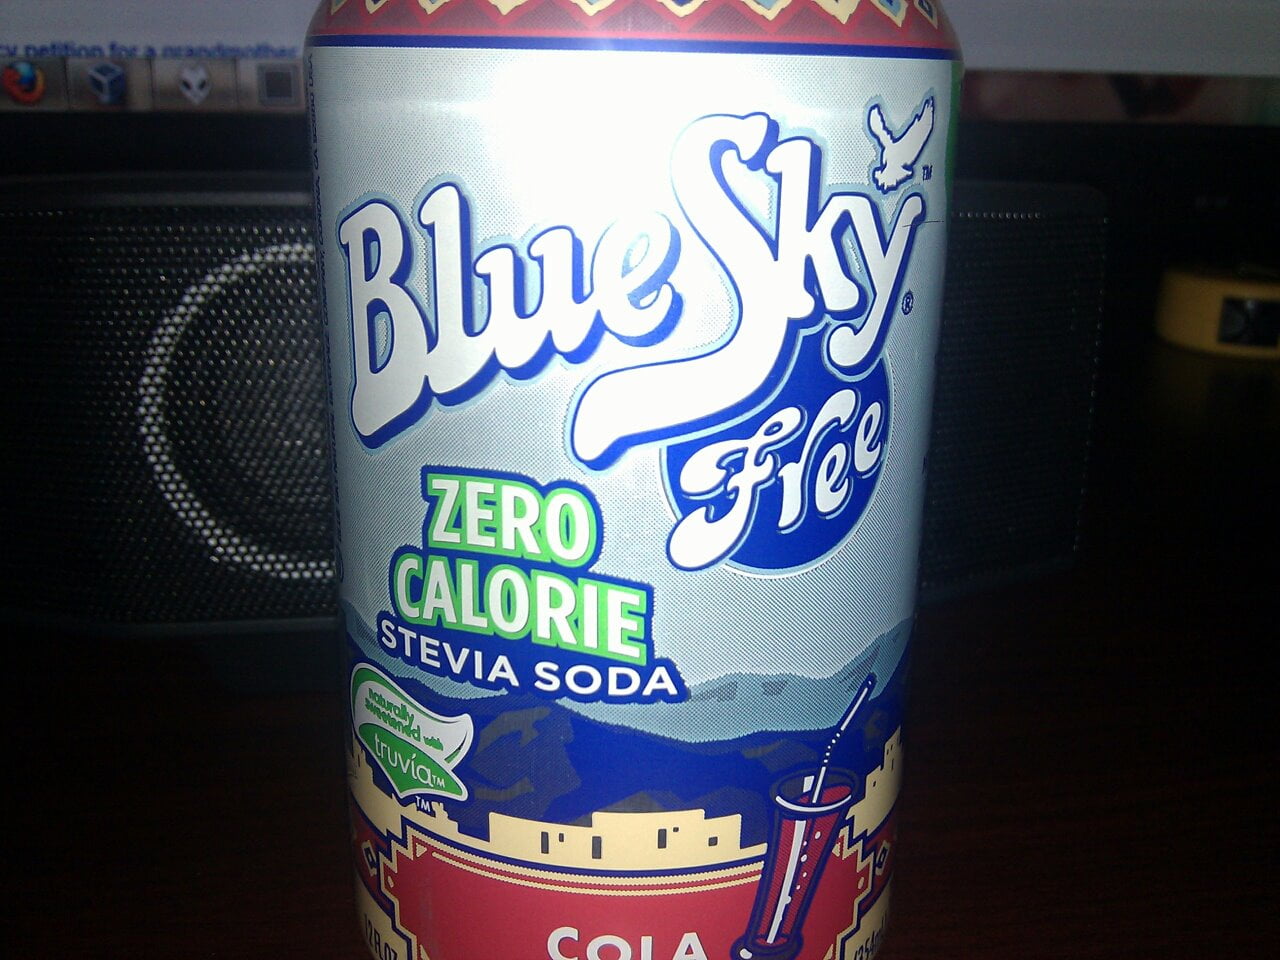 The best tasting diet cola that I know of